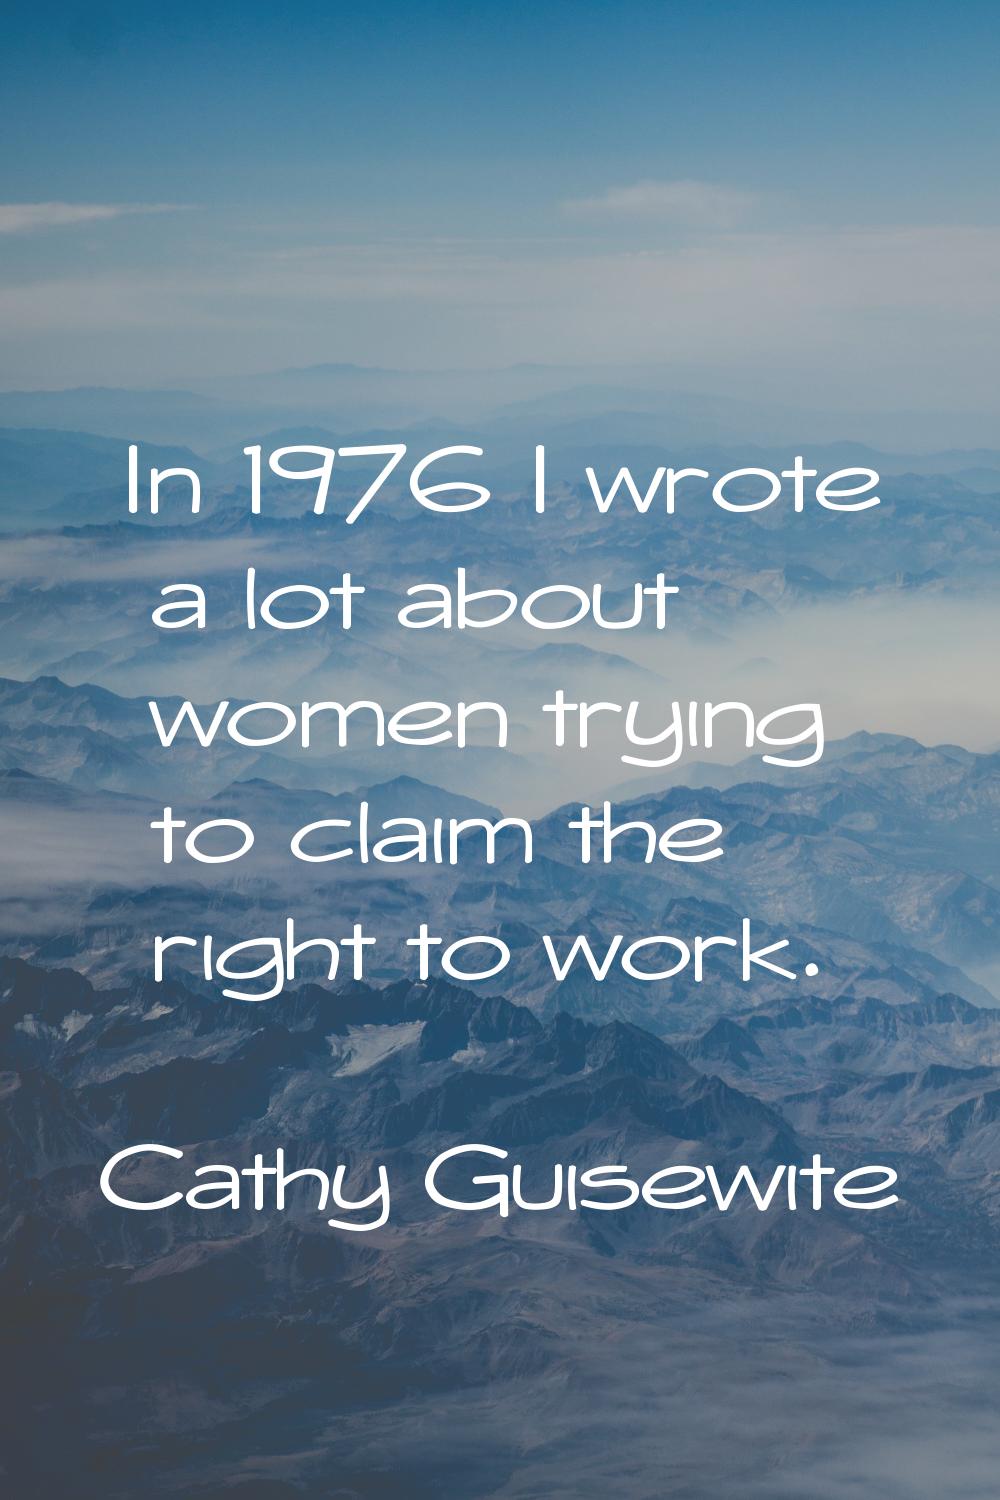 In 1976 I wrote a lot about women trying to claim the right to work.